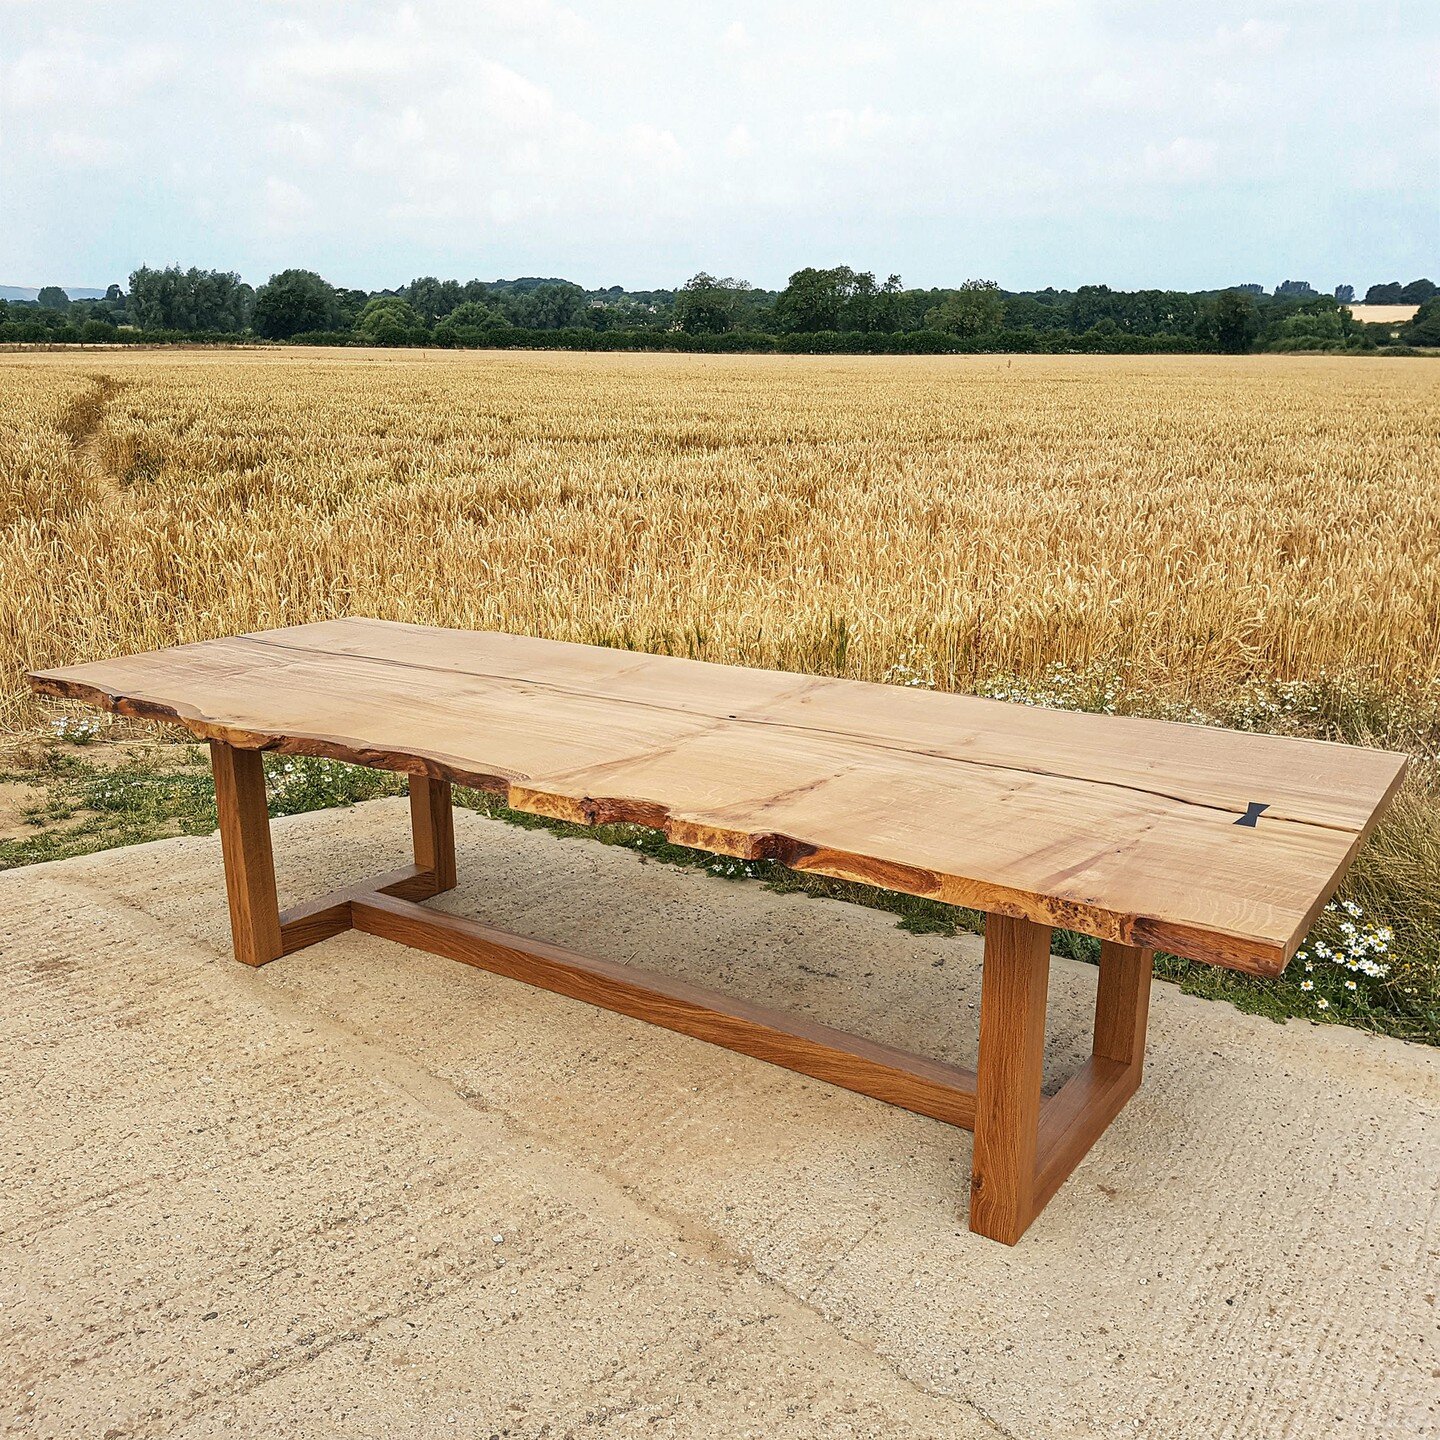 Did you know that we make tables, too?

We love this project - an incredible single board of quarter sawn English Oak, over a meter wide and 3.5 meters long, with a live edge that contrasts beautifully with the square geometry of the base. And those 